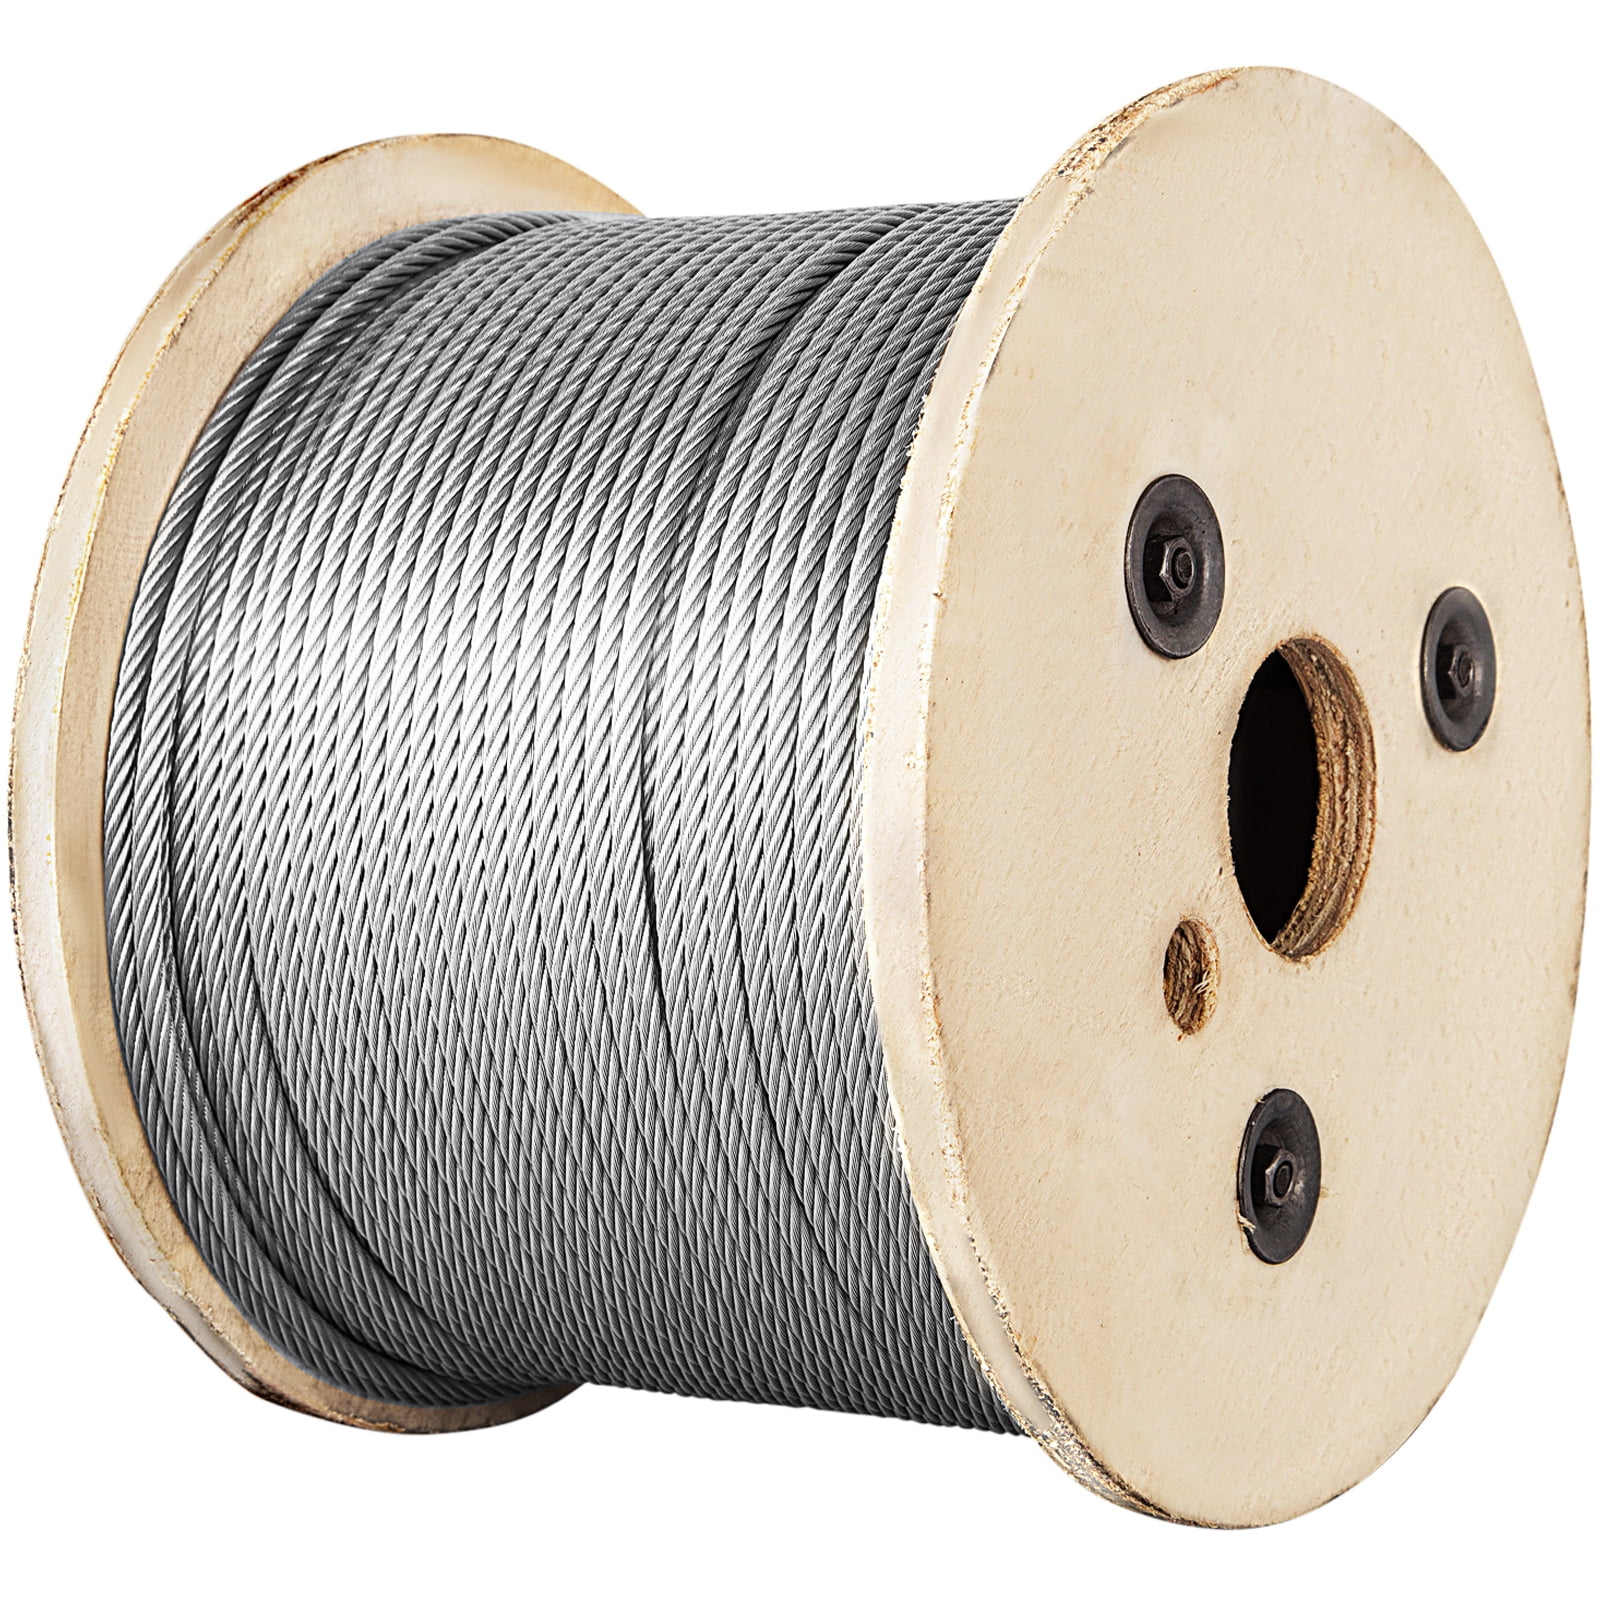 Cable 1/8 1x19 Stainless Steel Wire Rope Cable T316 250 Foot Reel Designed for Architectural Cable Railing and Marine Applications